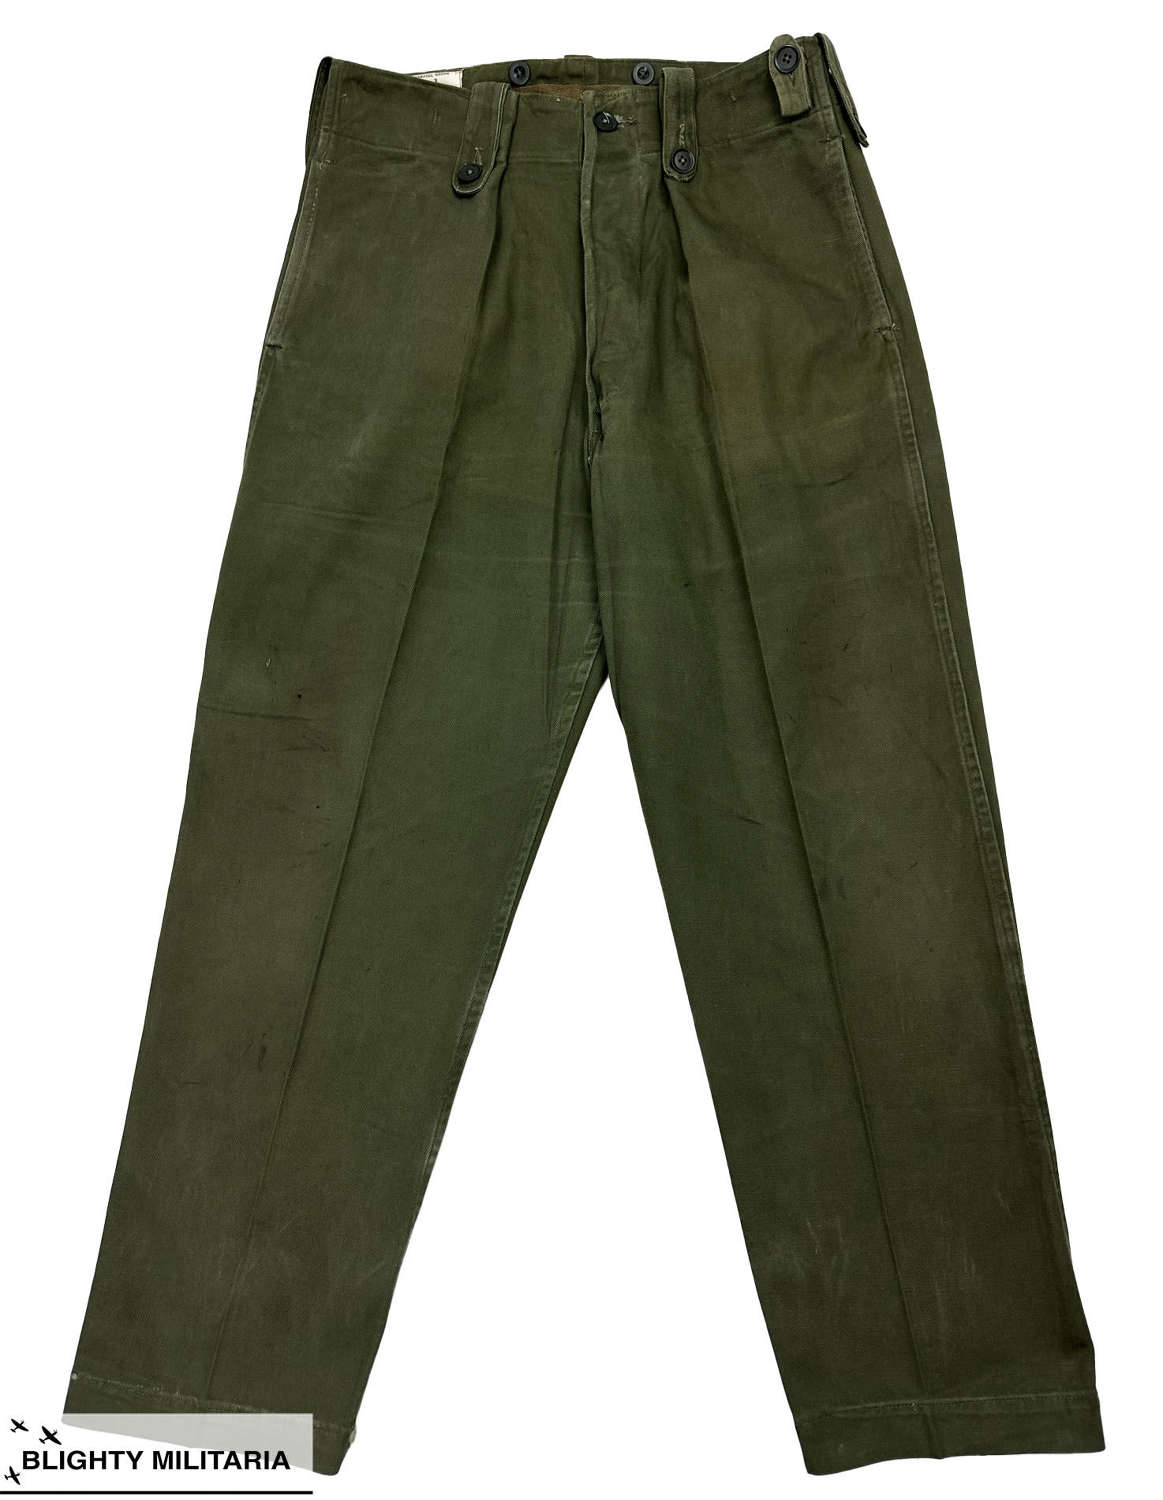 Original 1964 Dated British Army Overall Green Trousers - Size 3